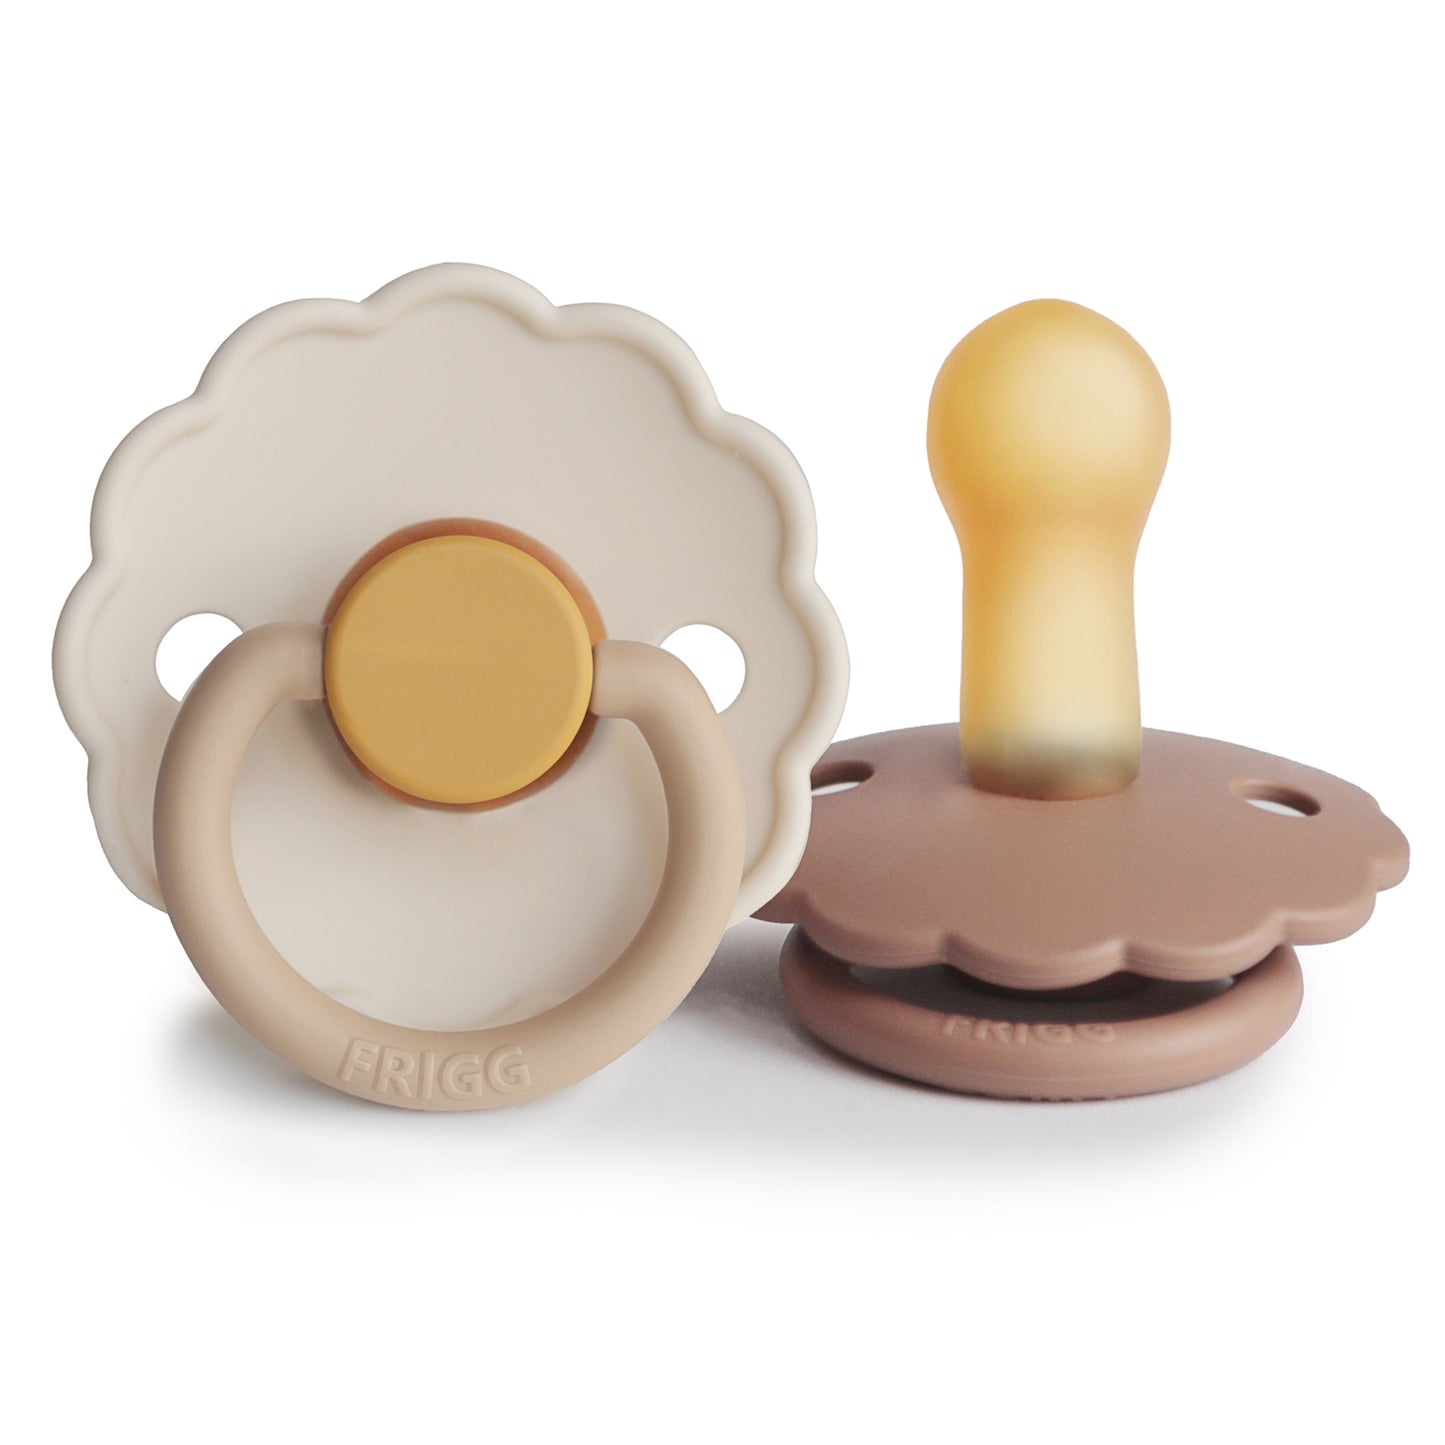 FRIGG DAISY NATURAL RUBBER BABY PACIFIER (CHAMOMILE / PEACH BRONZE) 2-PACK